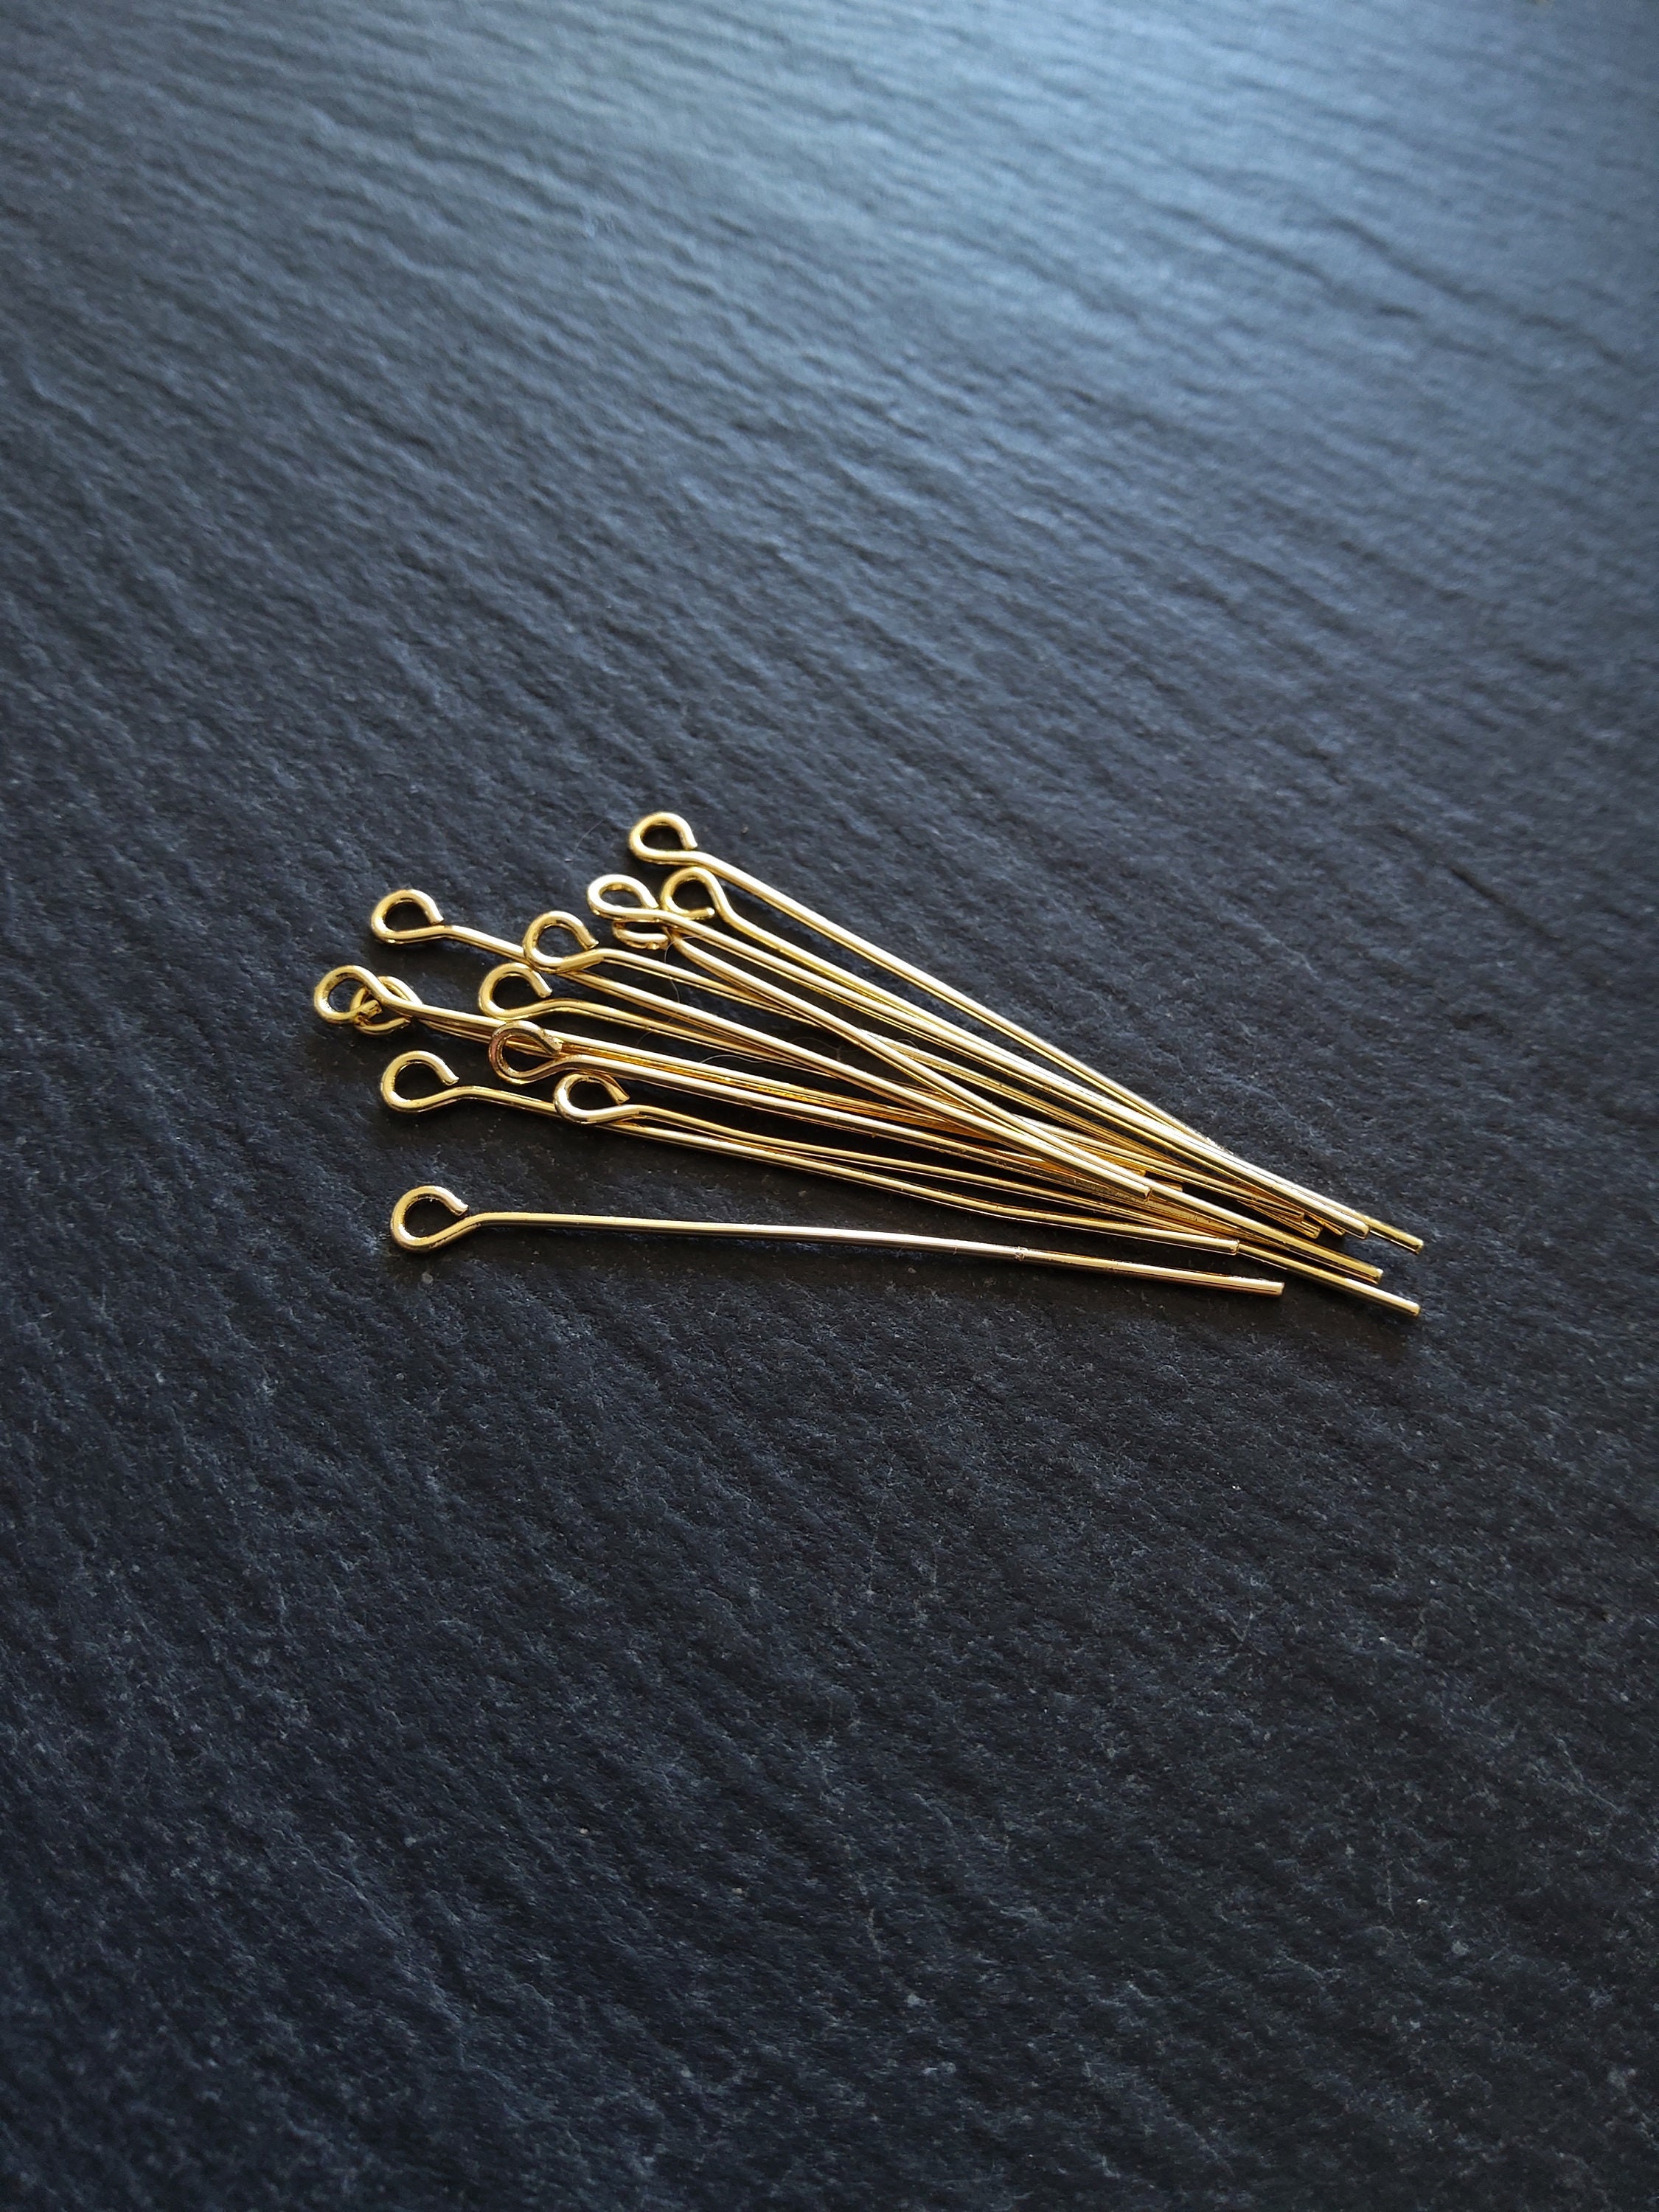 100 Yellow Brass Flat Head Pins - 20, 21, or 24 gauge - These are